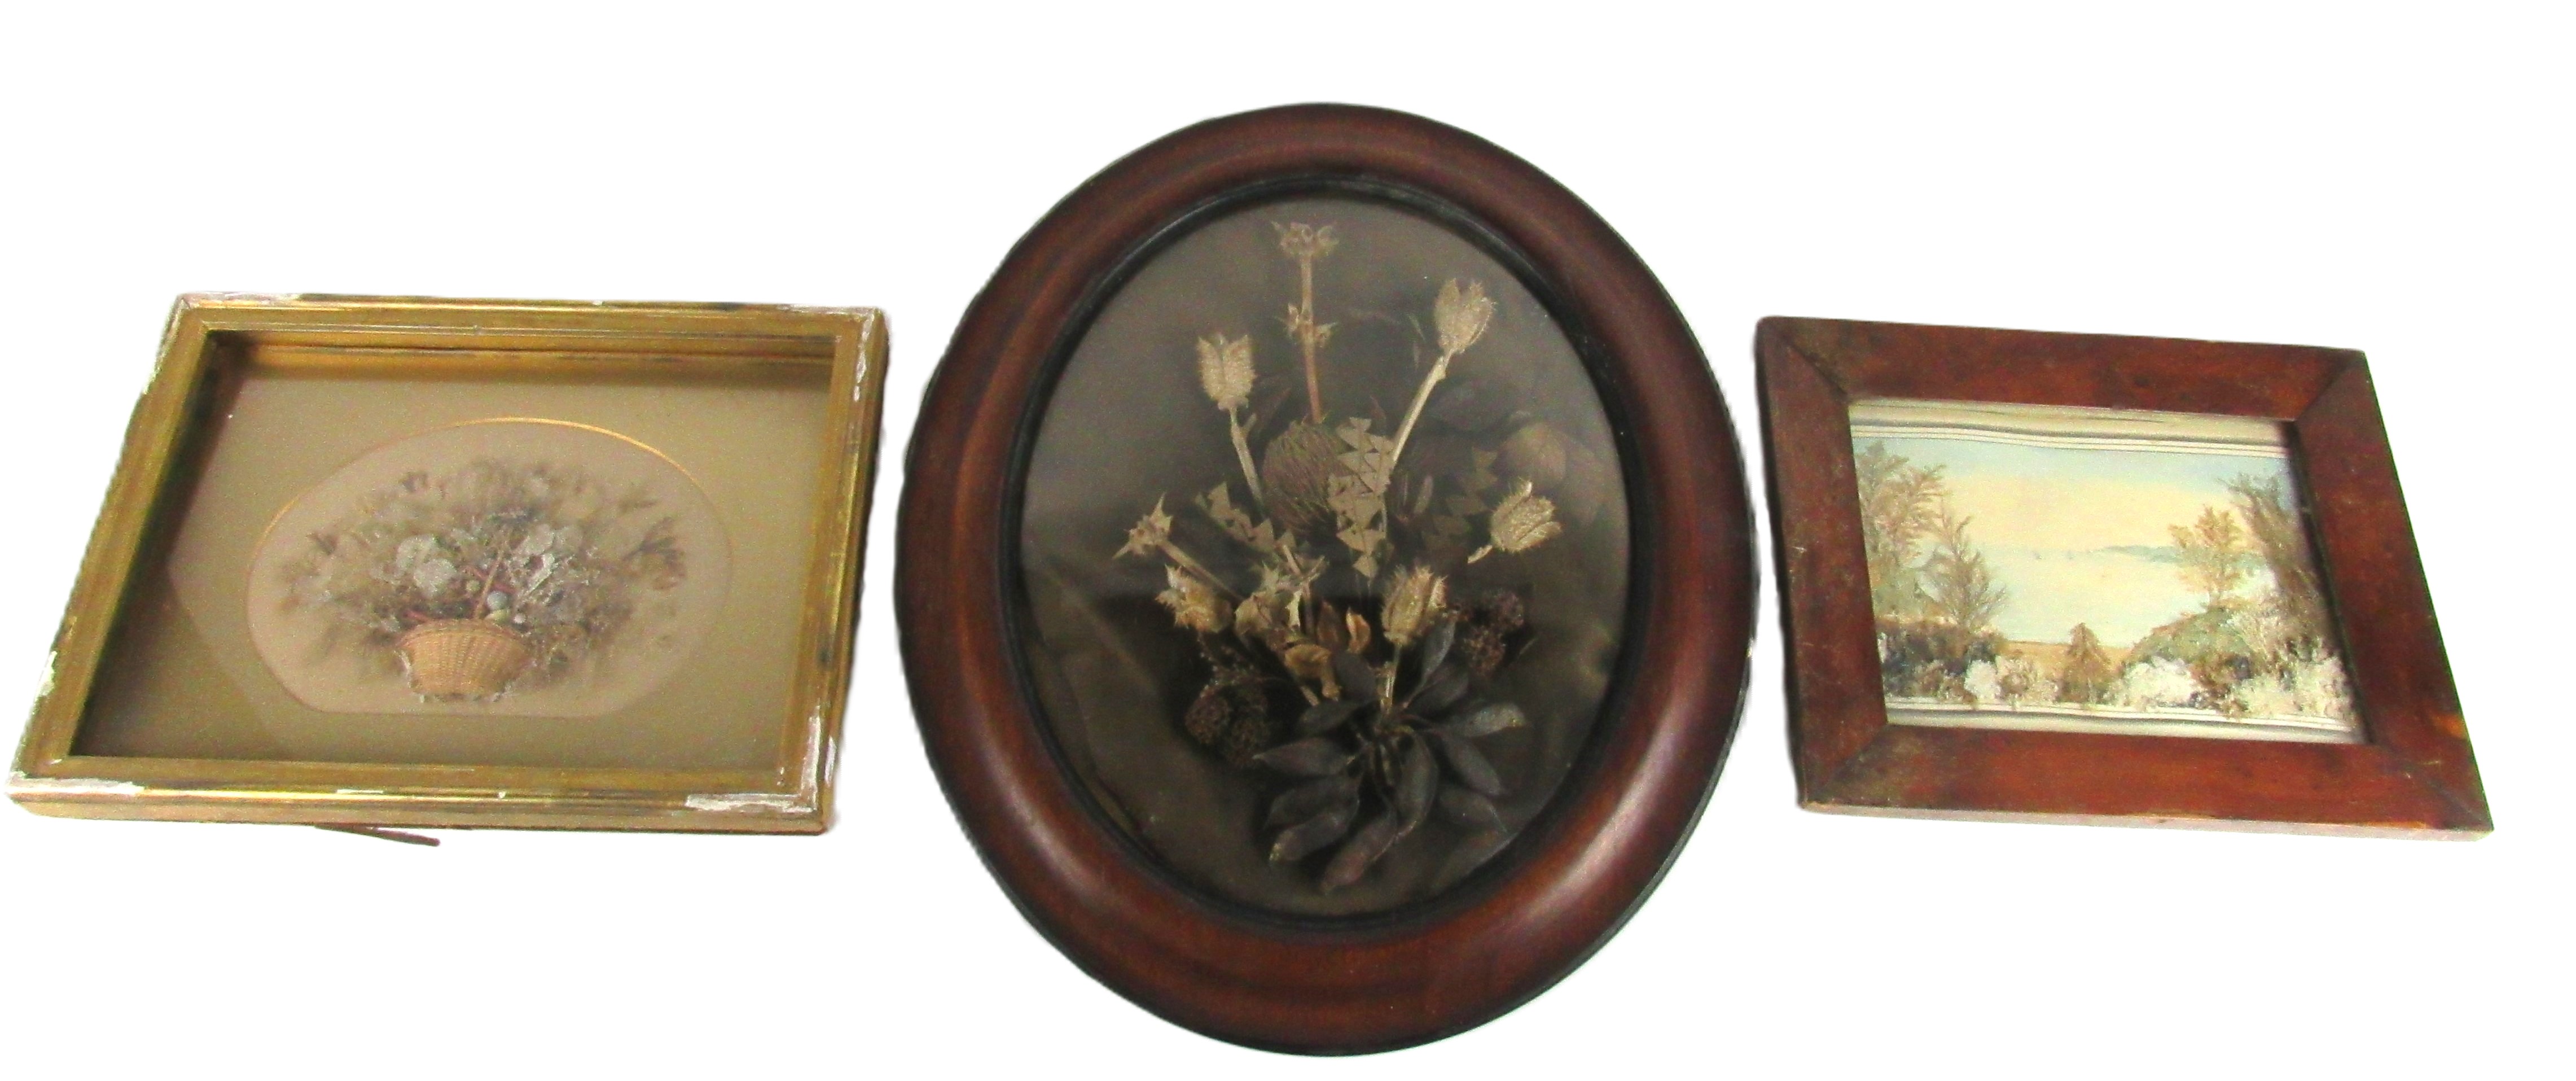 A rare early 19th Century attractive floral Diorama, by Emma Sophia M. Phillips, 1843, with